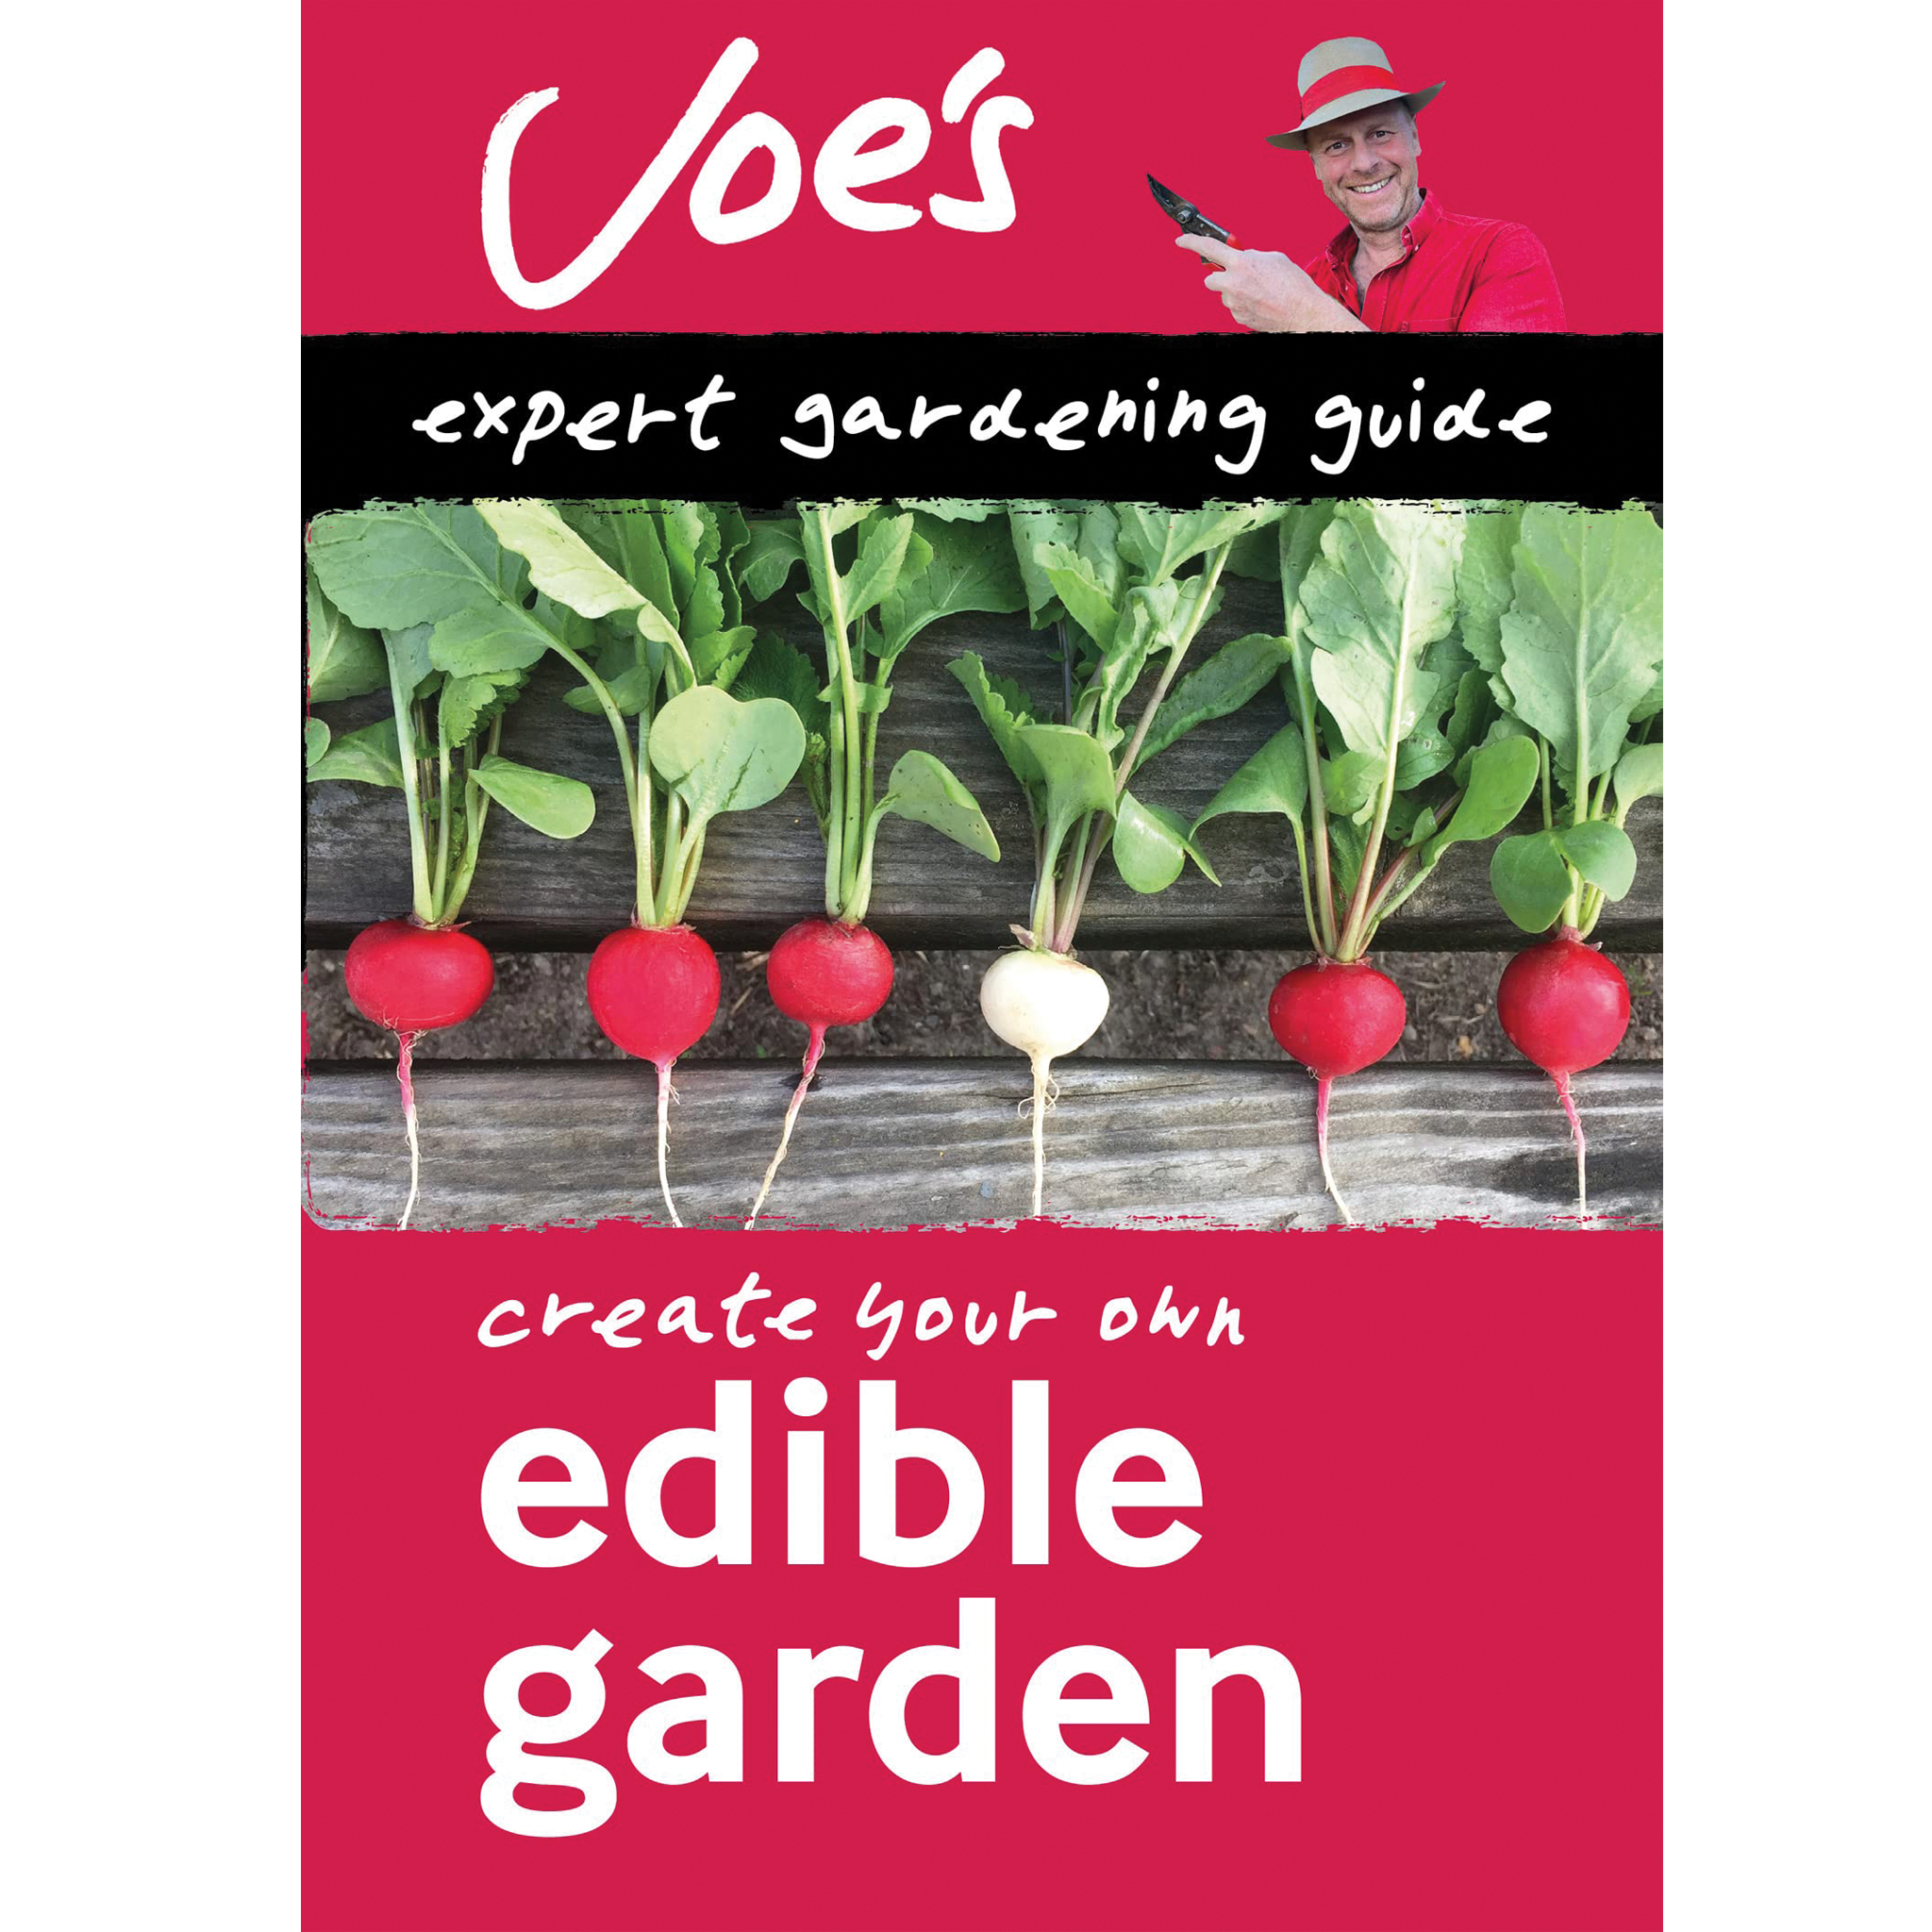 Edible Garden: How to grow your own herbs, fruit and vegetables with this gardening book for beginners